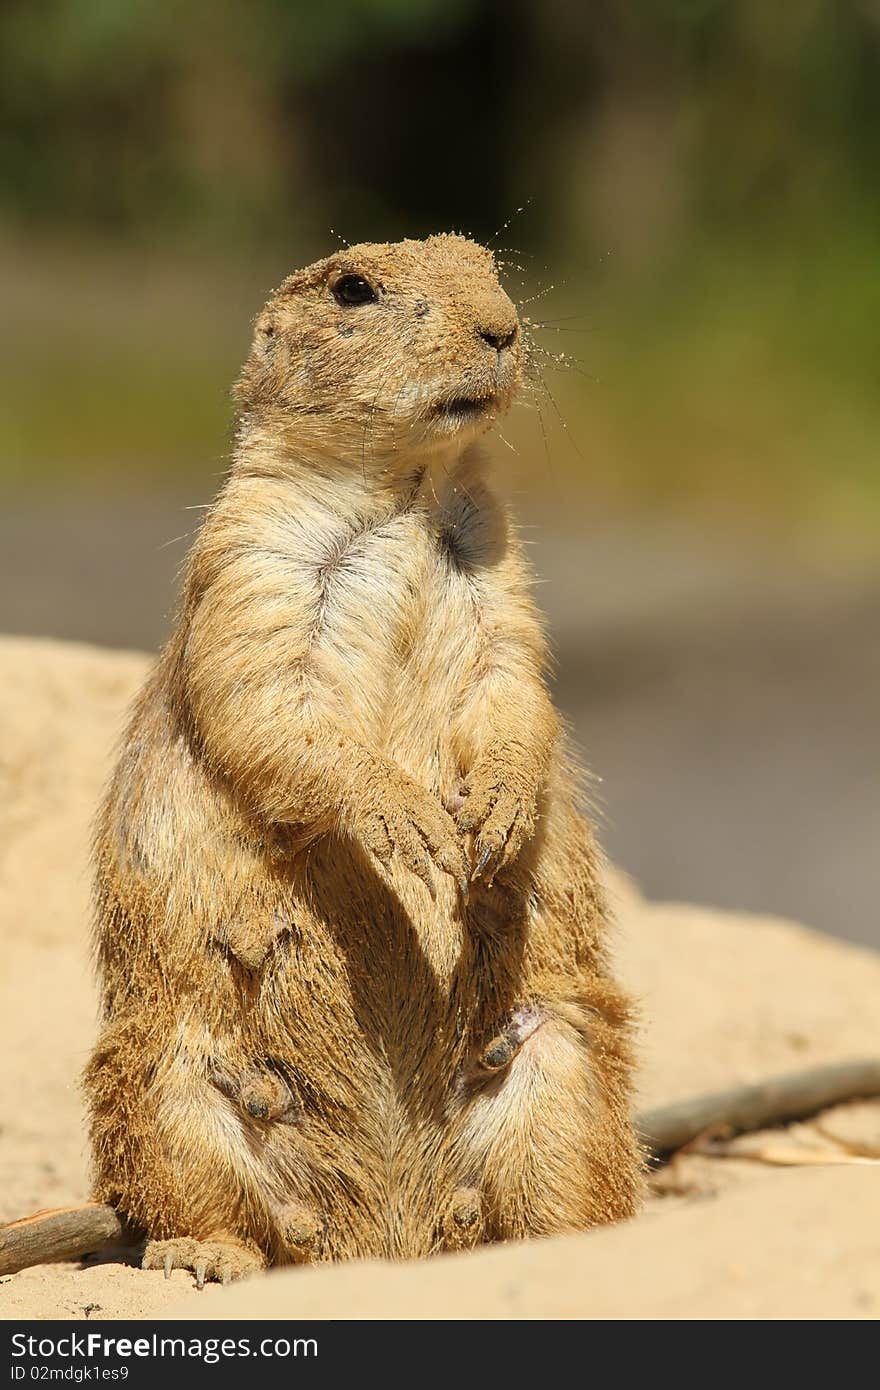 Animals: Prairie dog coverd with sand standing upright